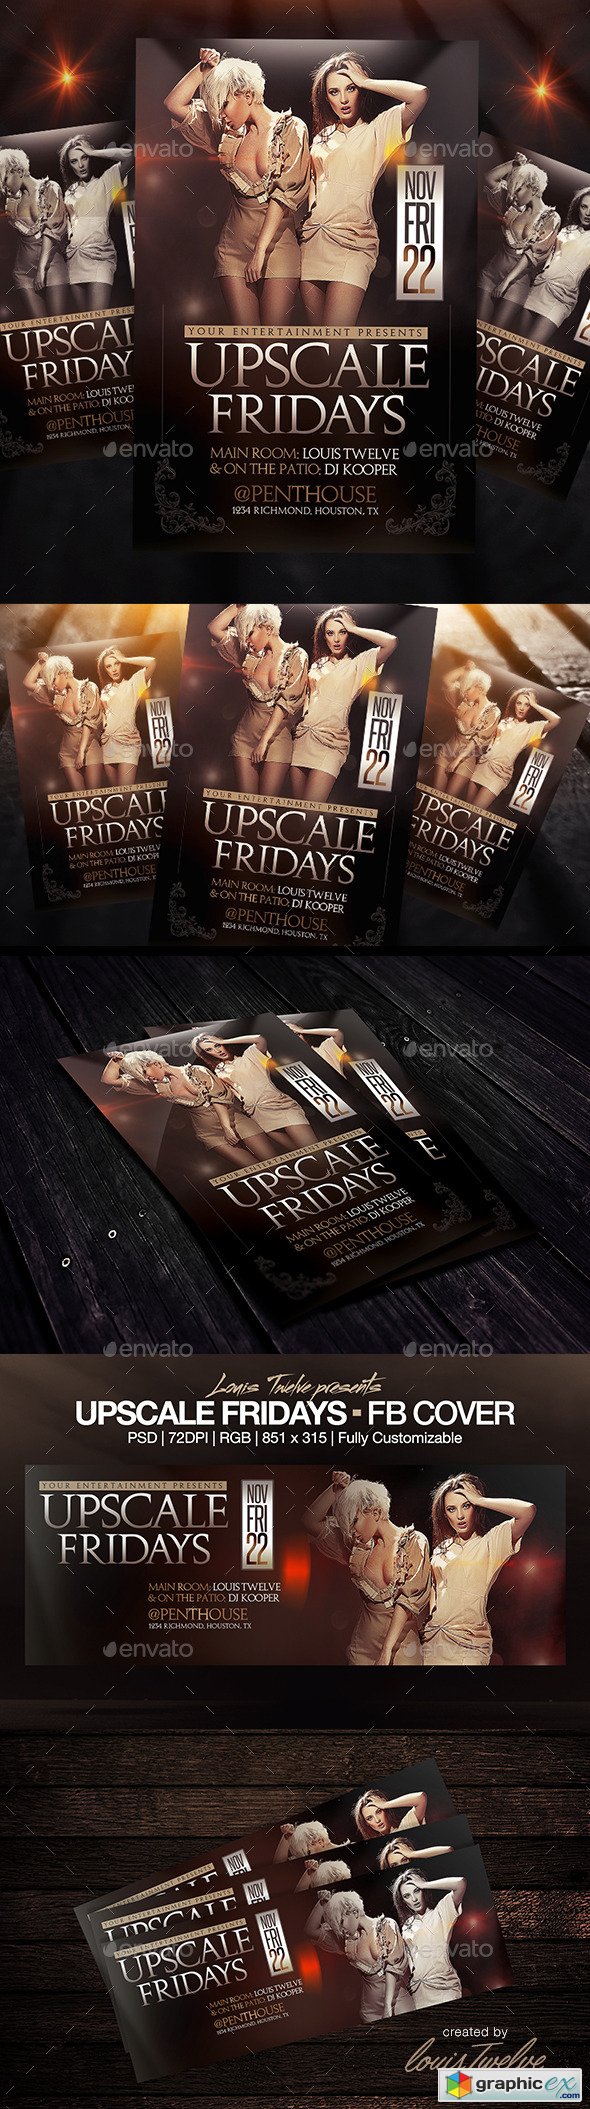 Upscale Fridays | Flyer + FB Cover